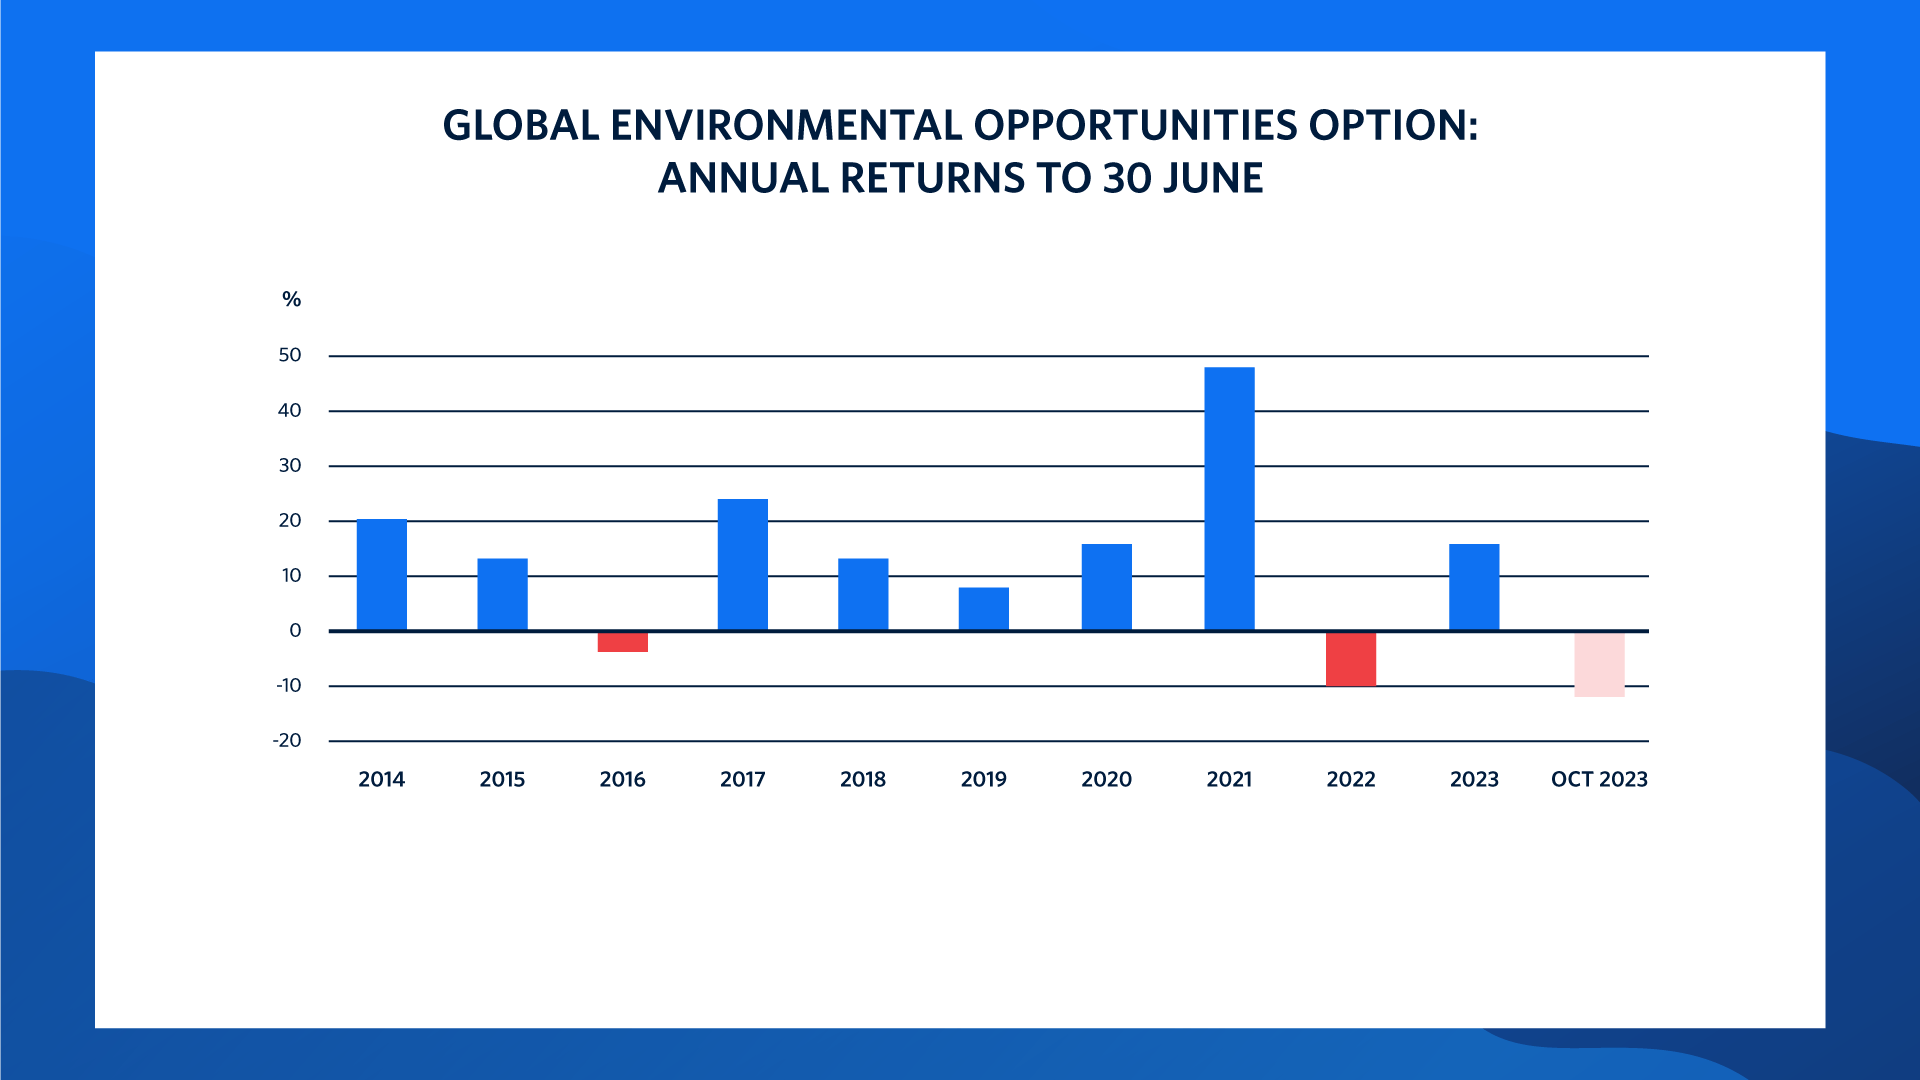 Chart 3: A graph showing the annual returns of the Global Environmental Opportunities investment option over the last 10 years (2014 to October 2023). In 2021, the option recorded a return of nearly 50%. This financial year, it is currently recording -11%.